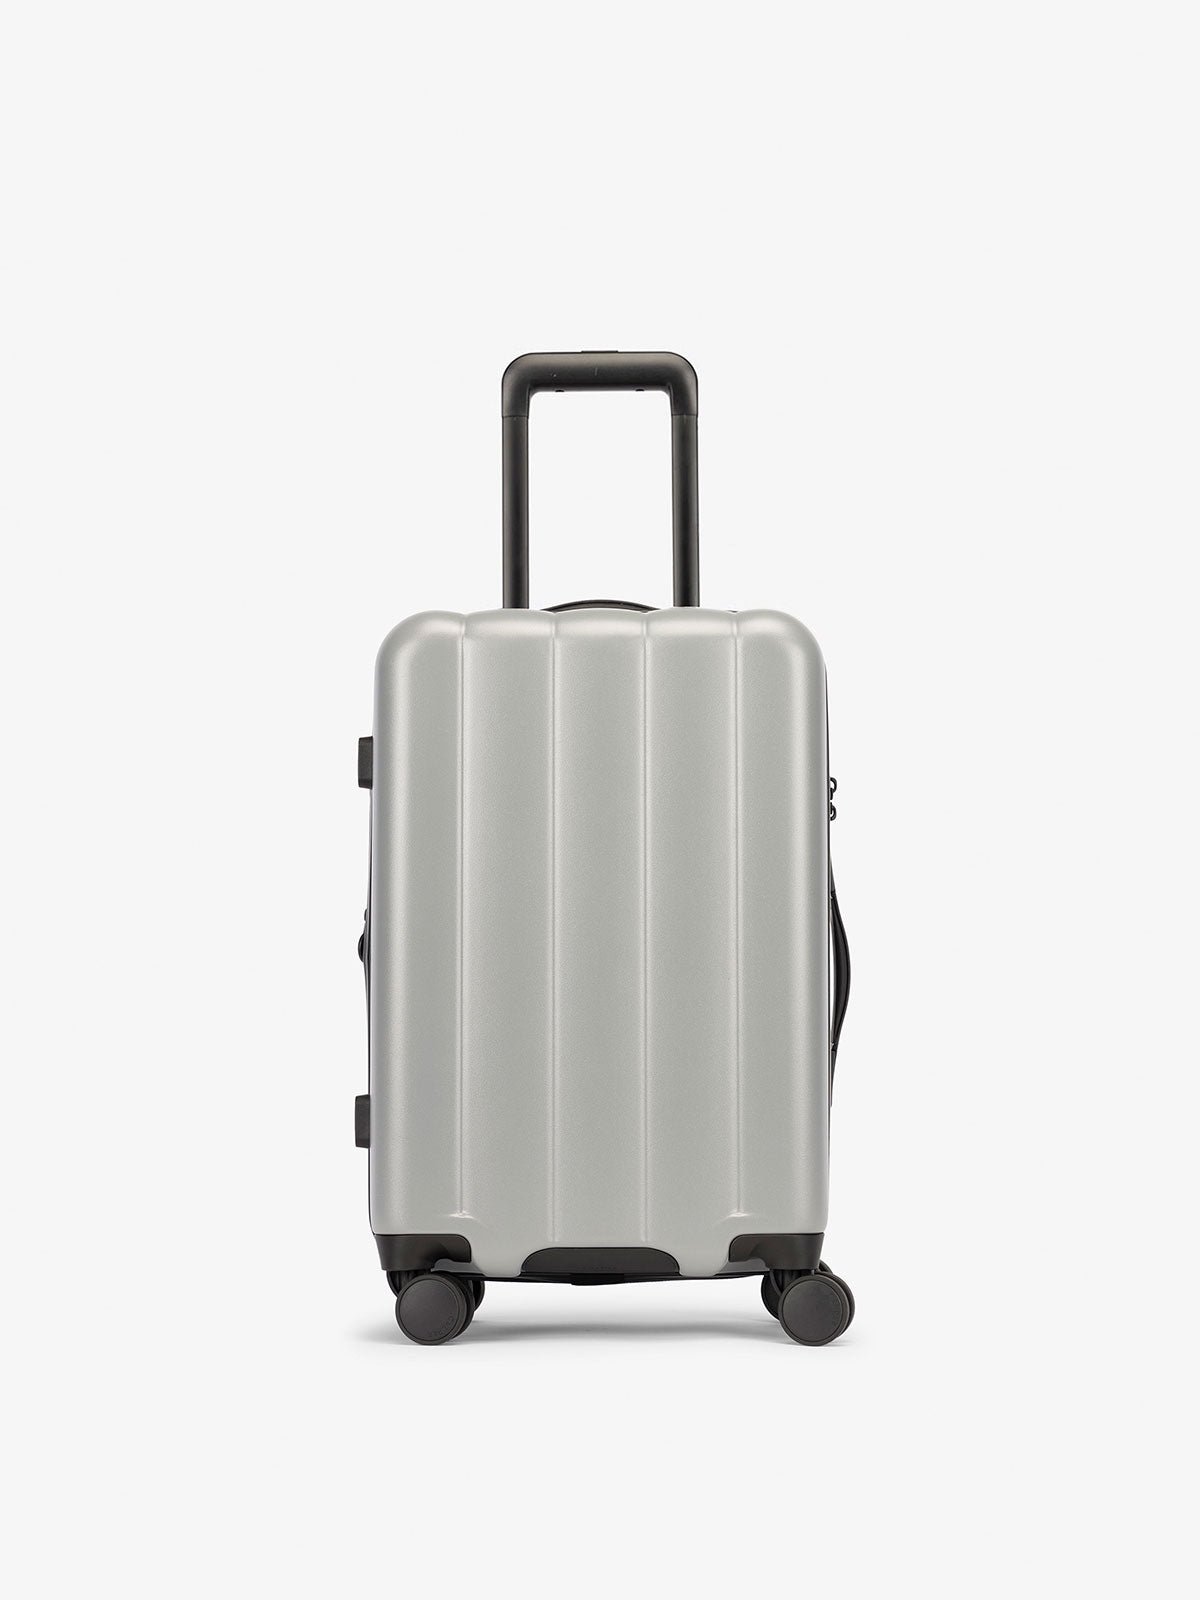 Smoke gray carry-on luggage made from an ultra-durable polycarbonate shell and expandable by up to 2"